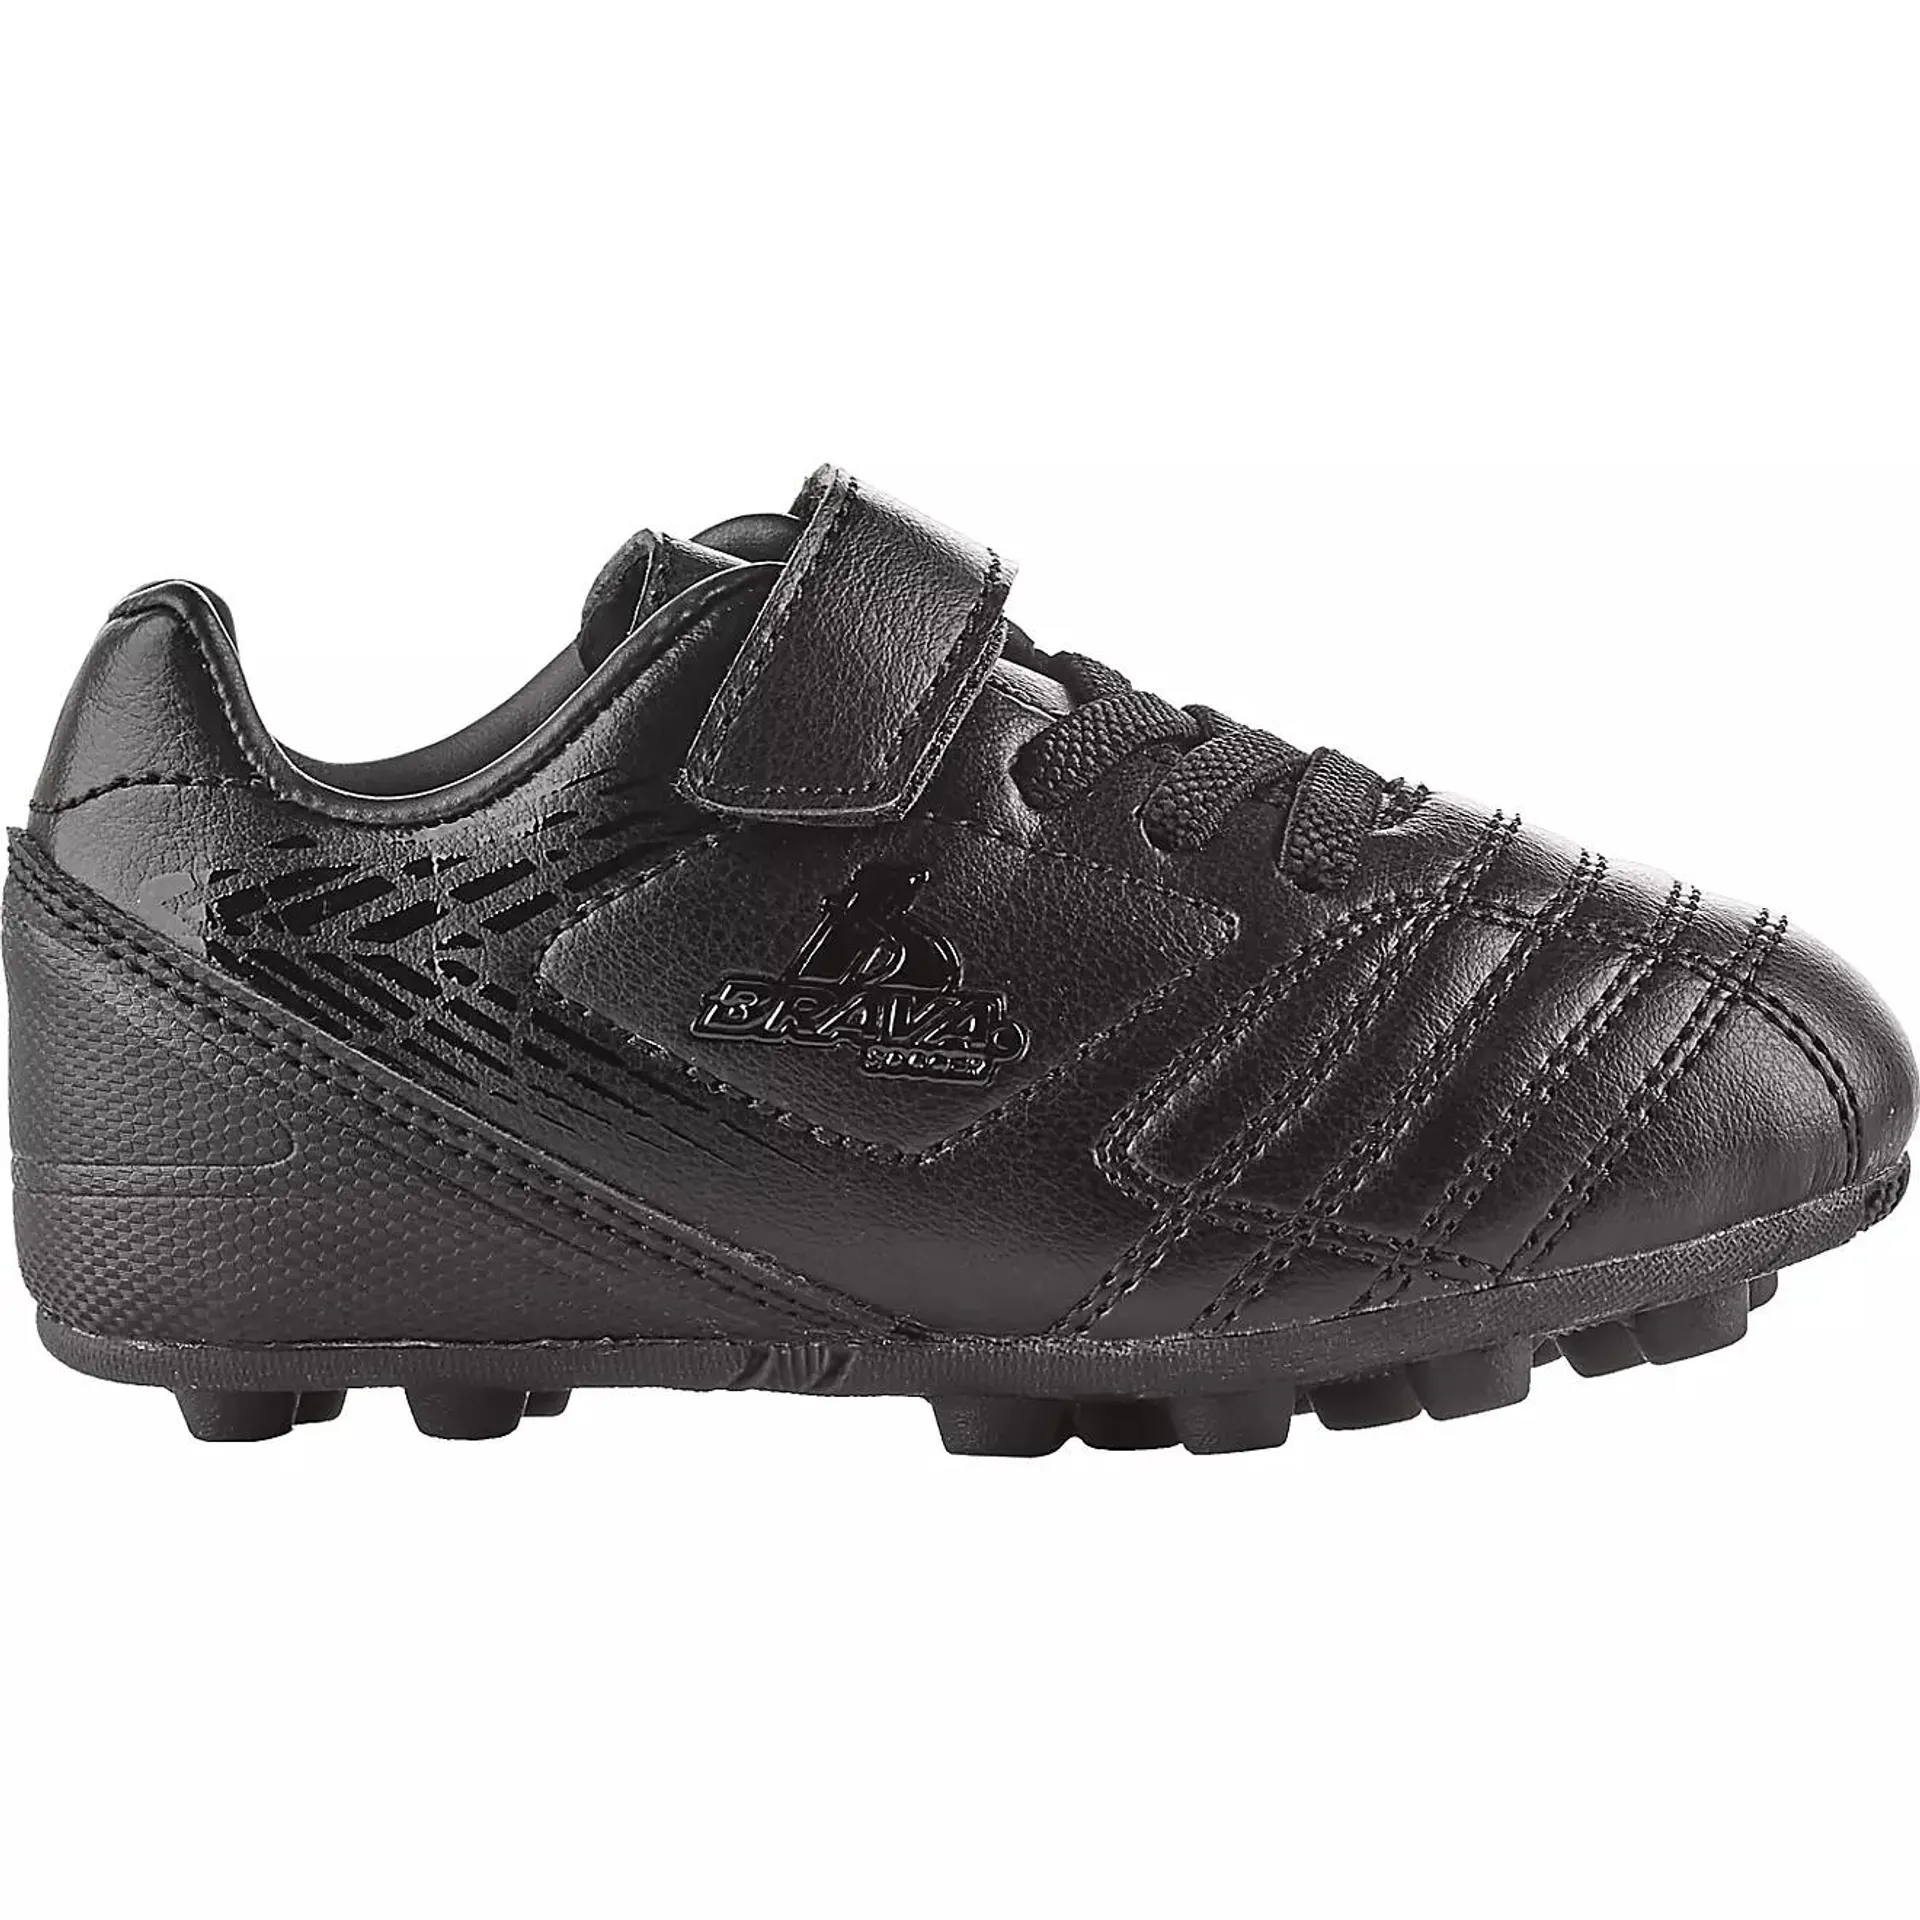 Brava Soccer Toddlers' Racer III Soccer Cleats